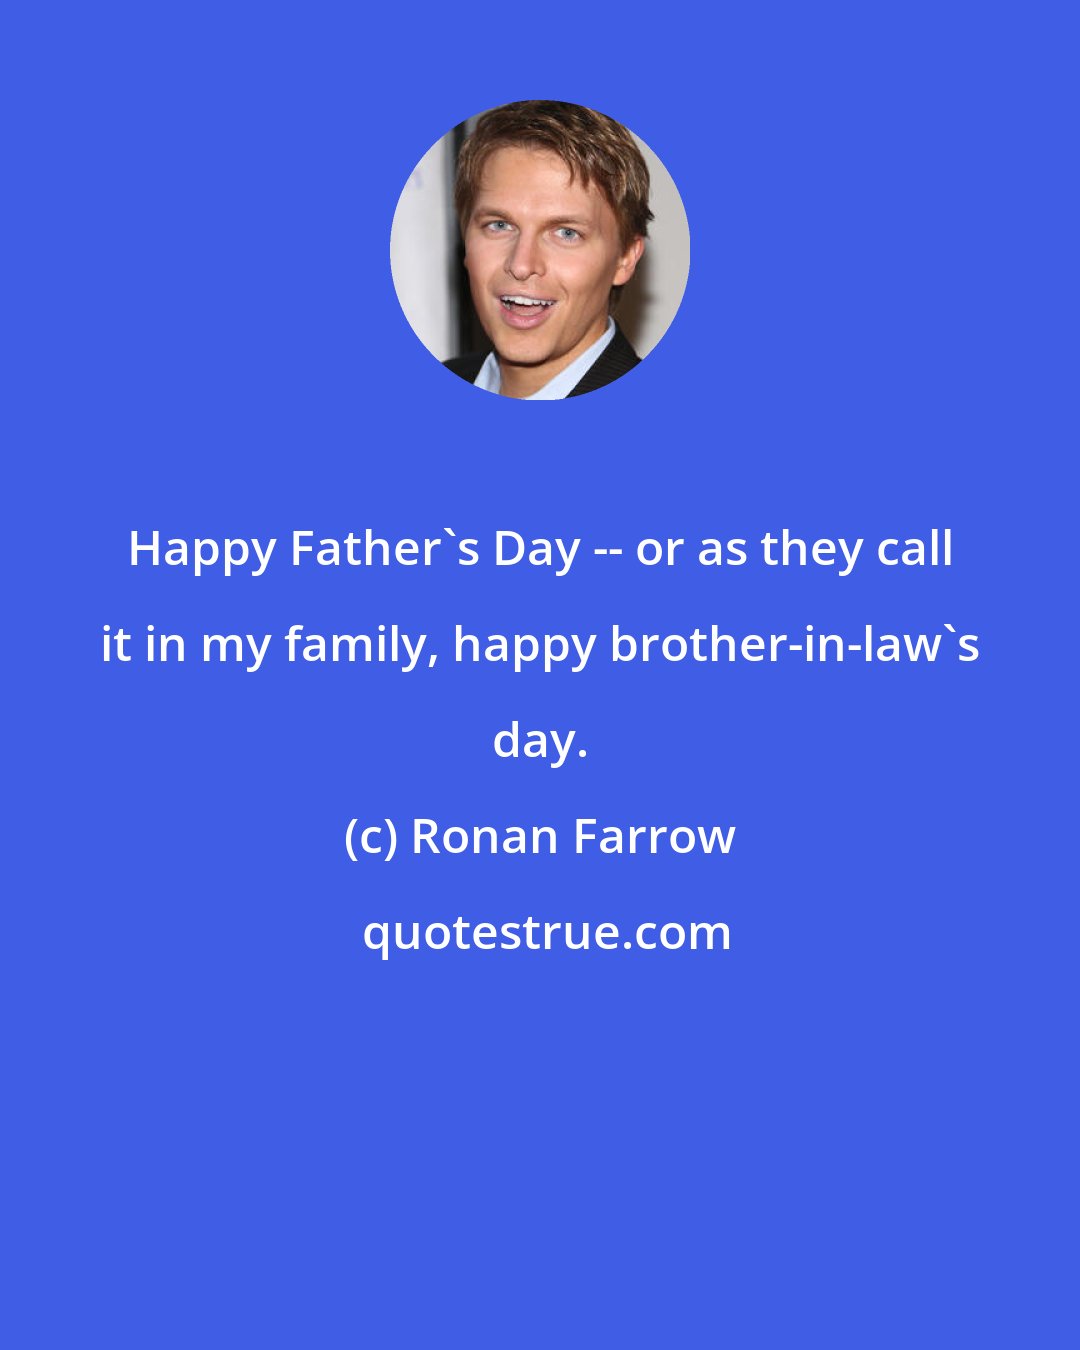 Ronan Farrow: Happy Father's Day -- or as they call it in my family, happy brother-in-law's day.